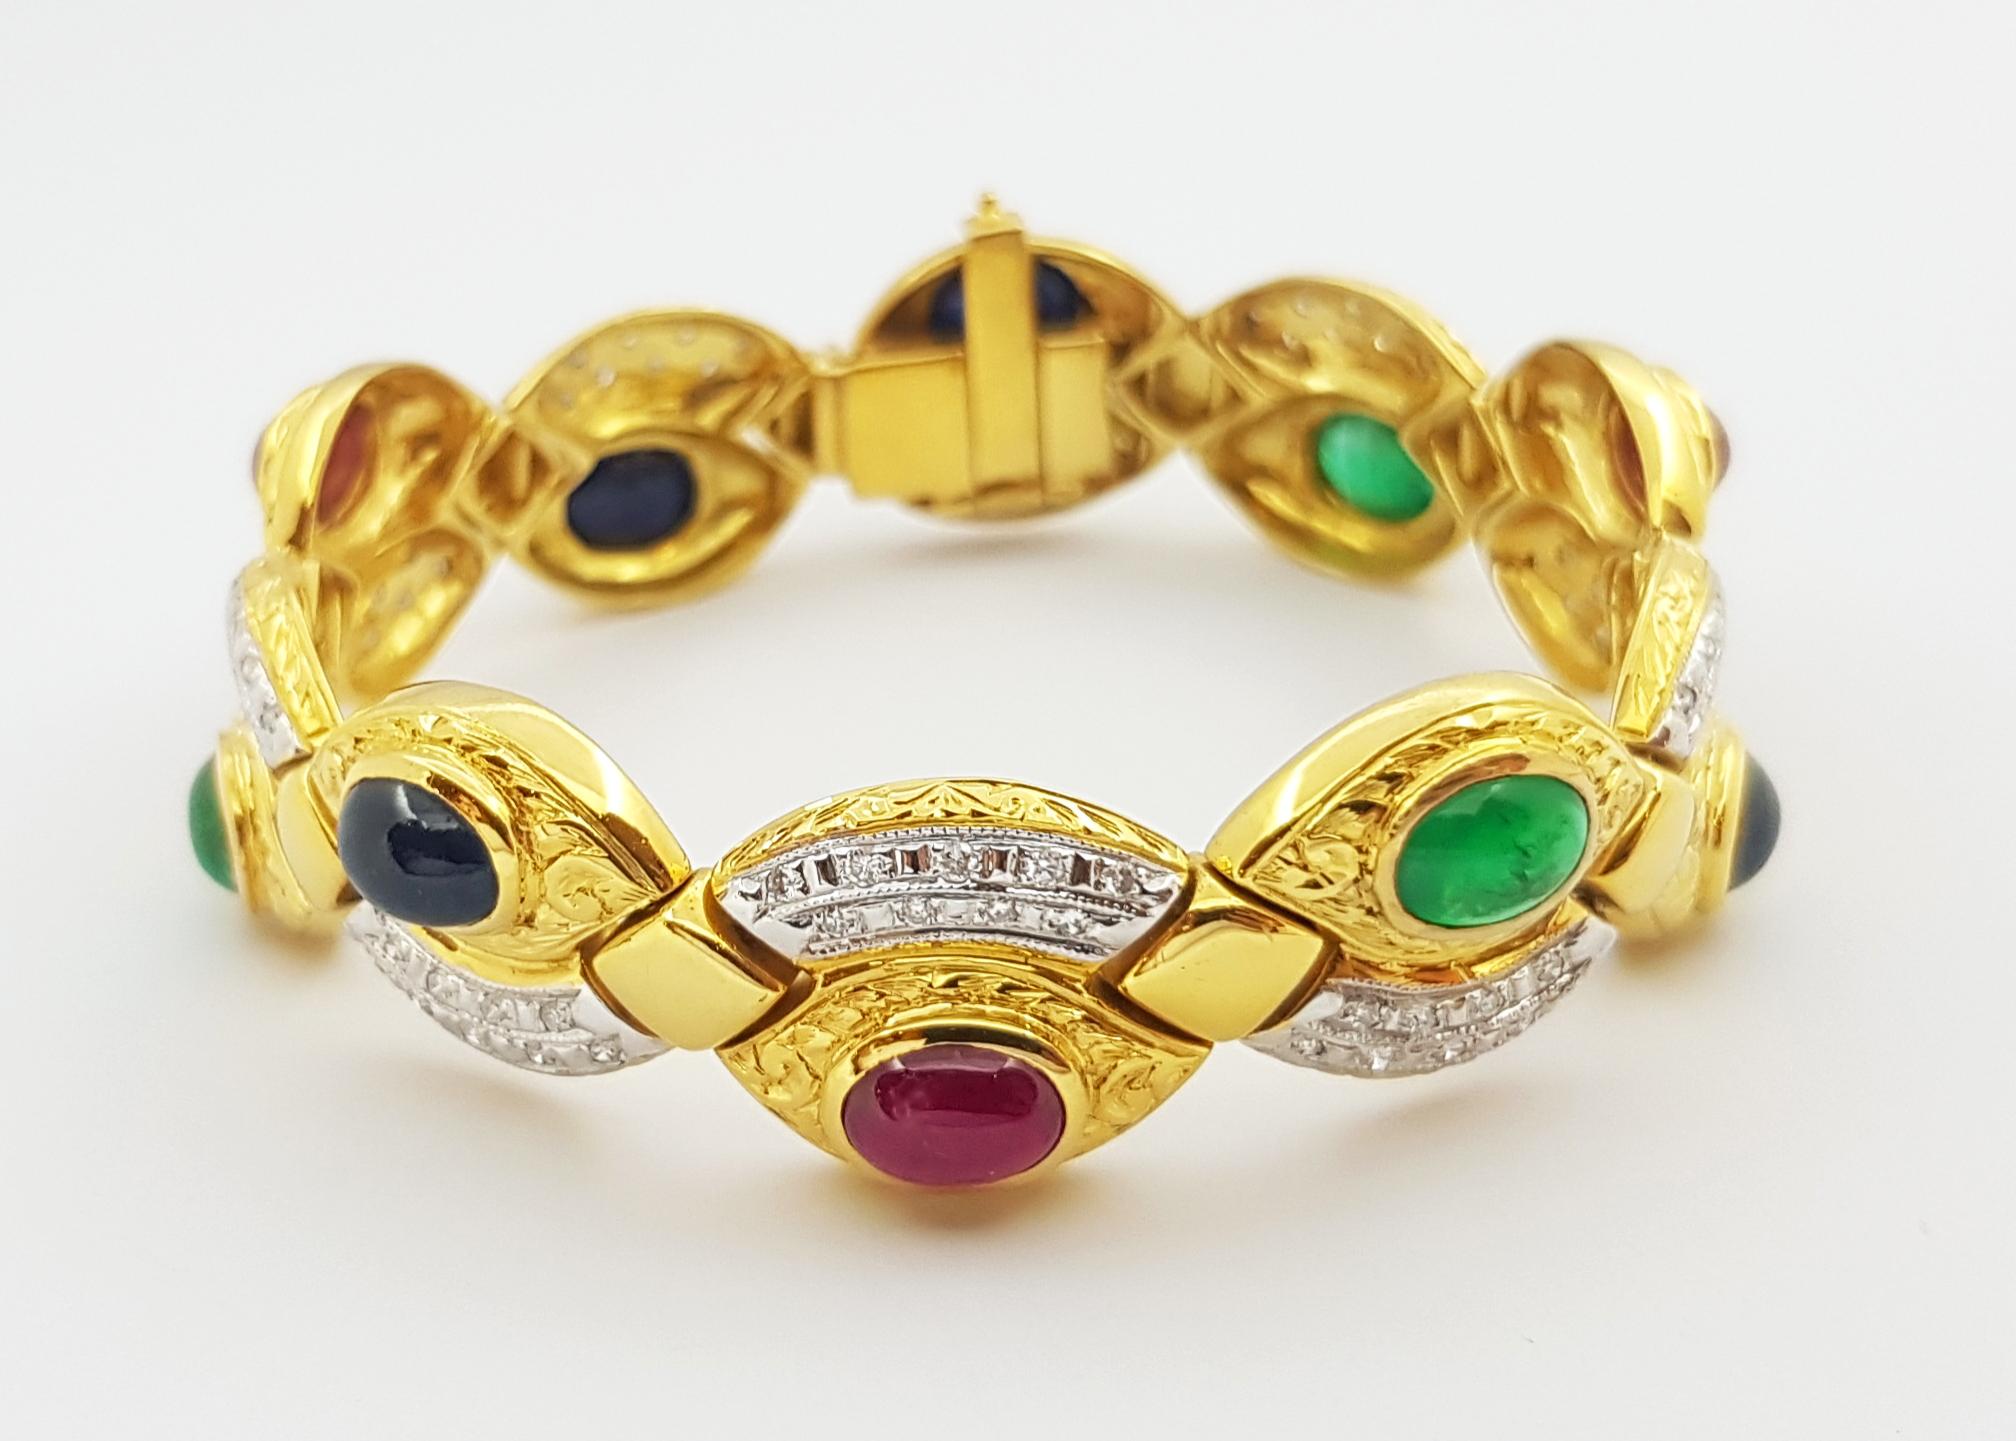 Cabochon Ruby, Emerald, Blue Sapphire with Diamond Bracelet in 18 Karat Gold In New Condition For Sale In Bangkok, TH